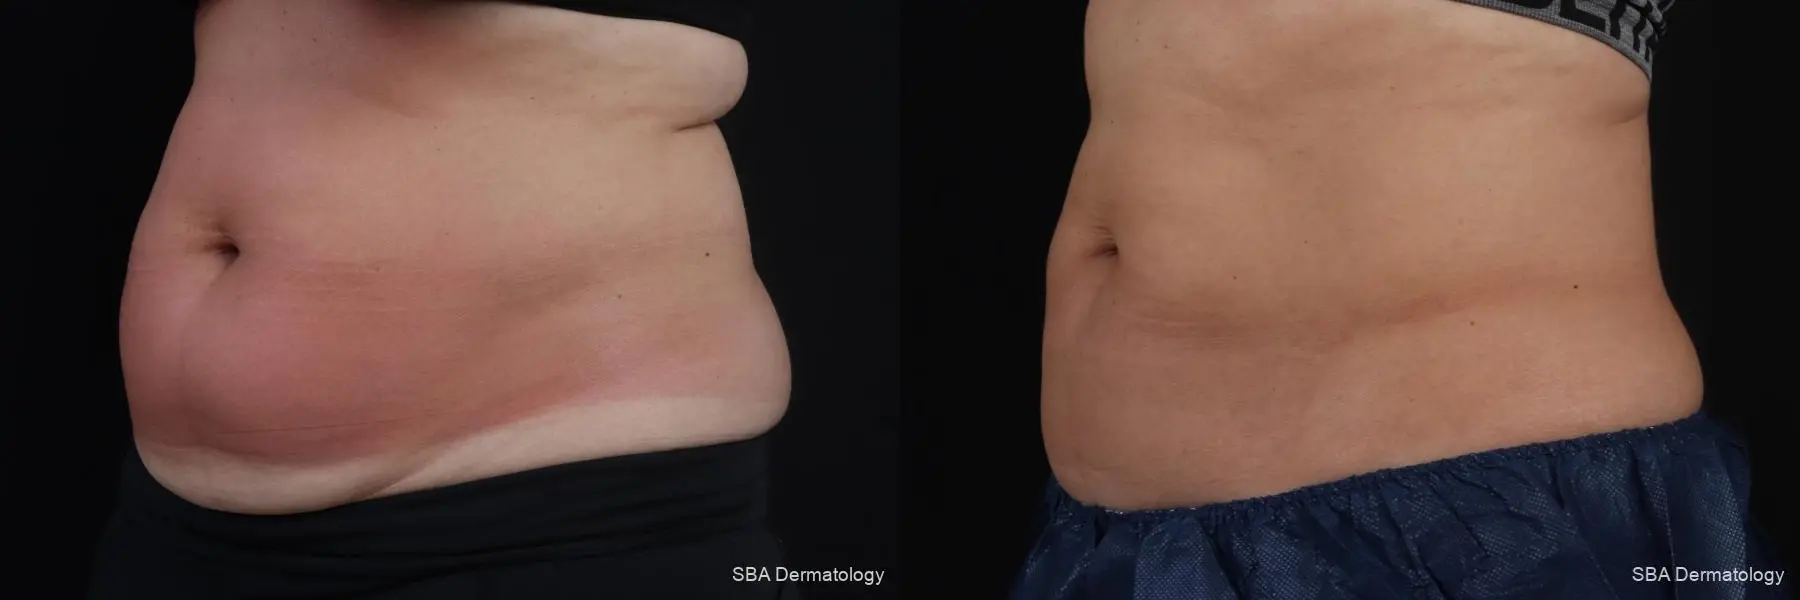 Coolsculpting: Patient 6 - Before and After 2